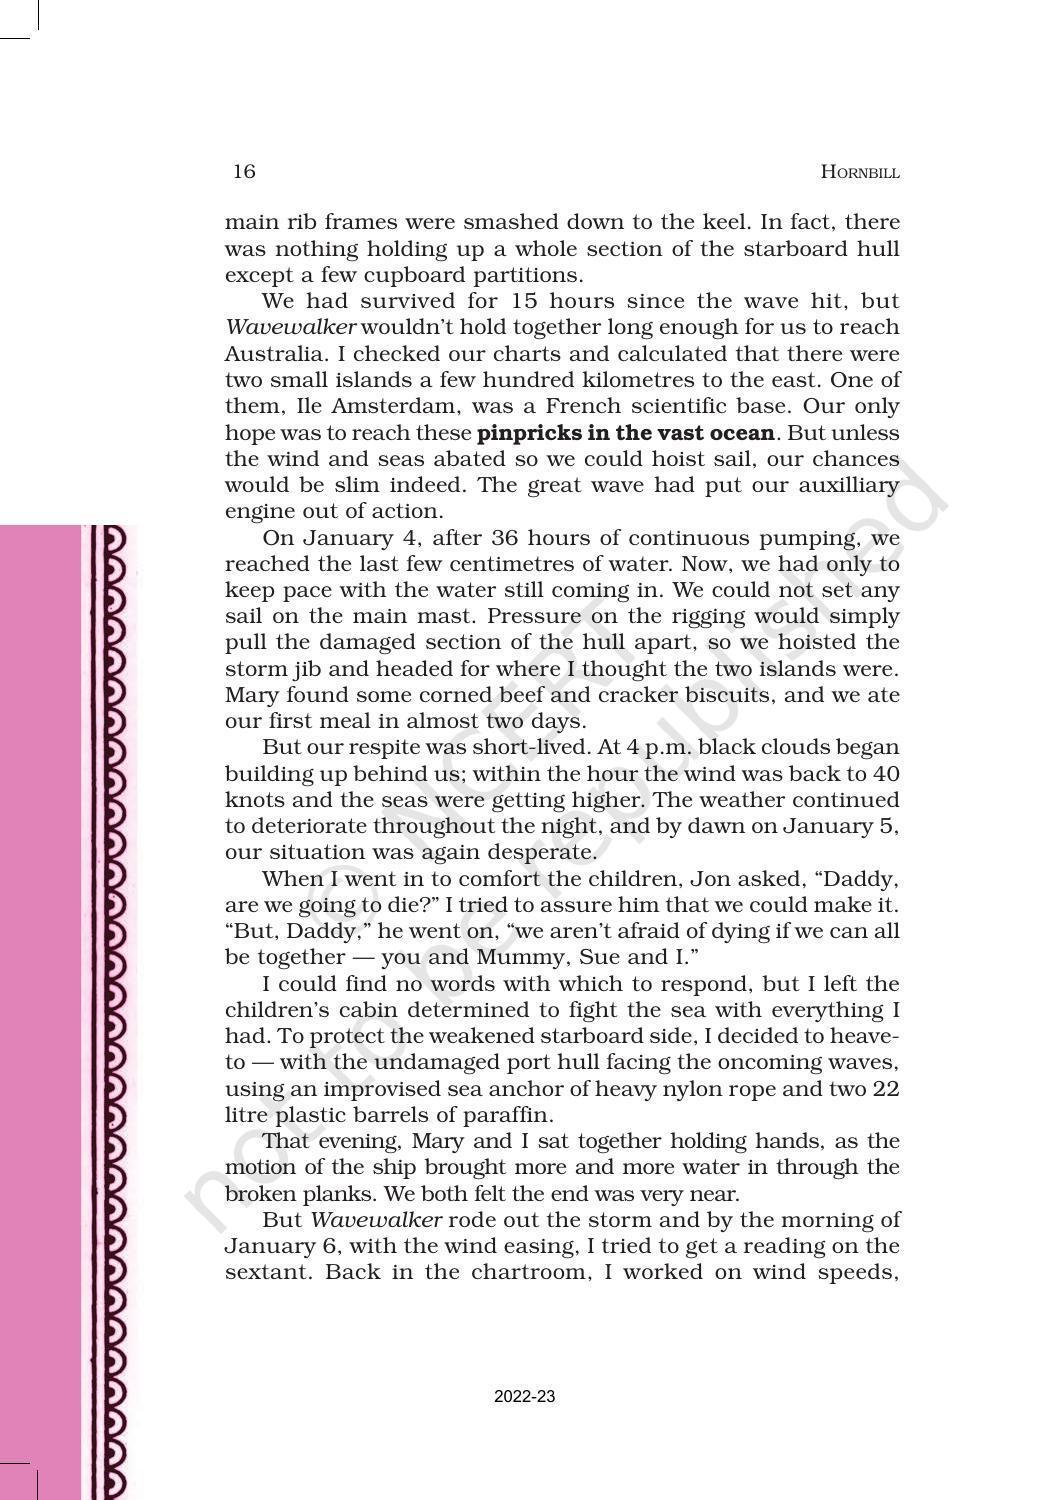 NCERT Book for Class 11 English Hornbill Chapter 2 We’re Not Afraid to Die… if We Can All Be Together - Page 4